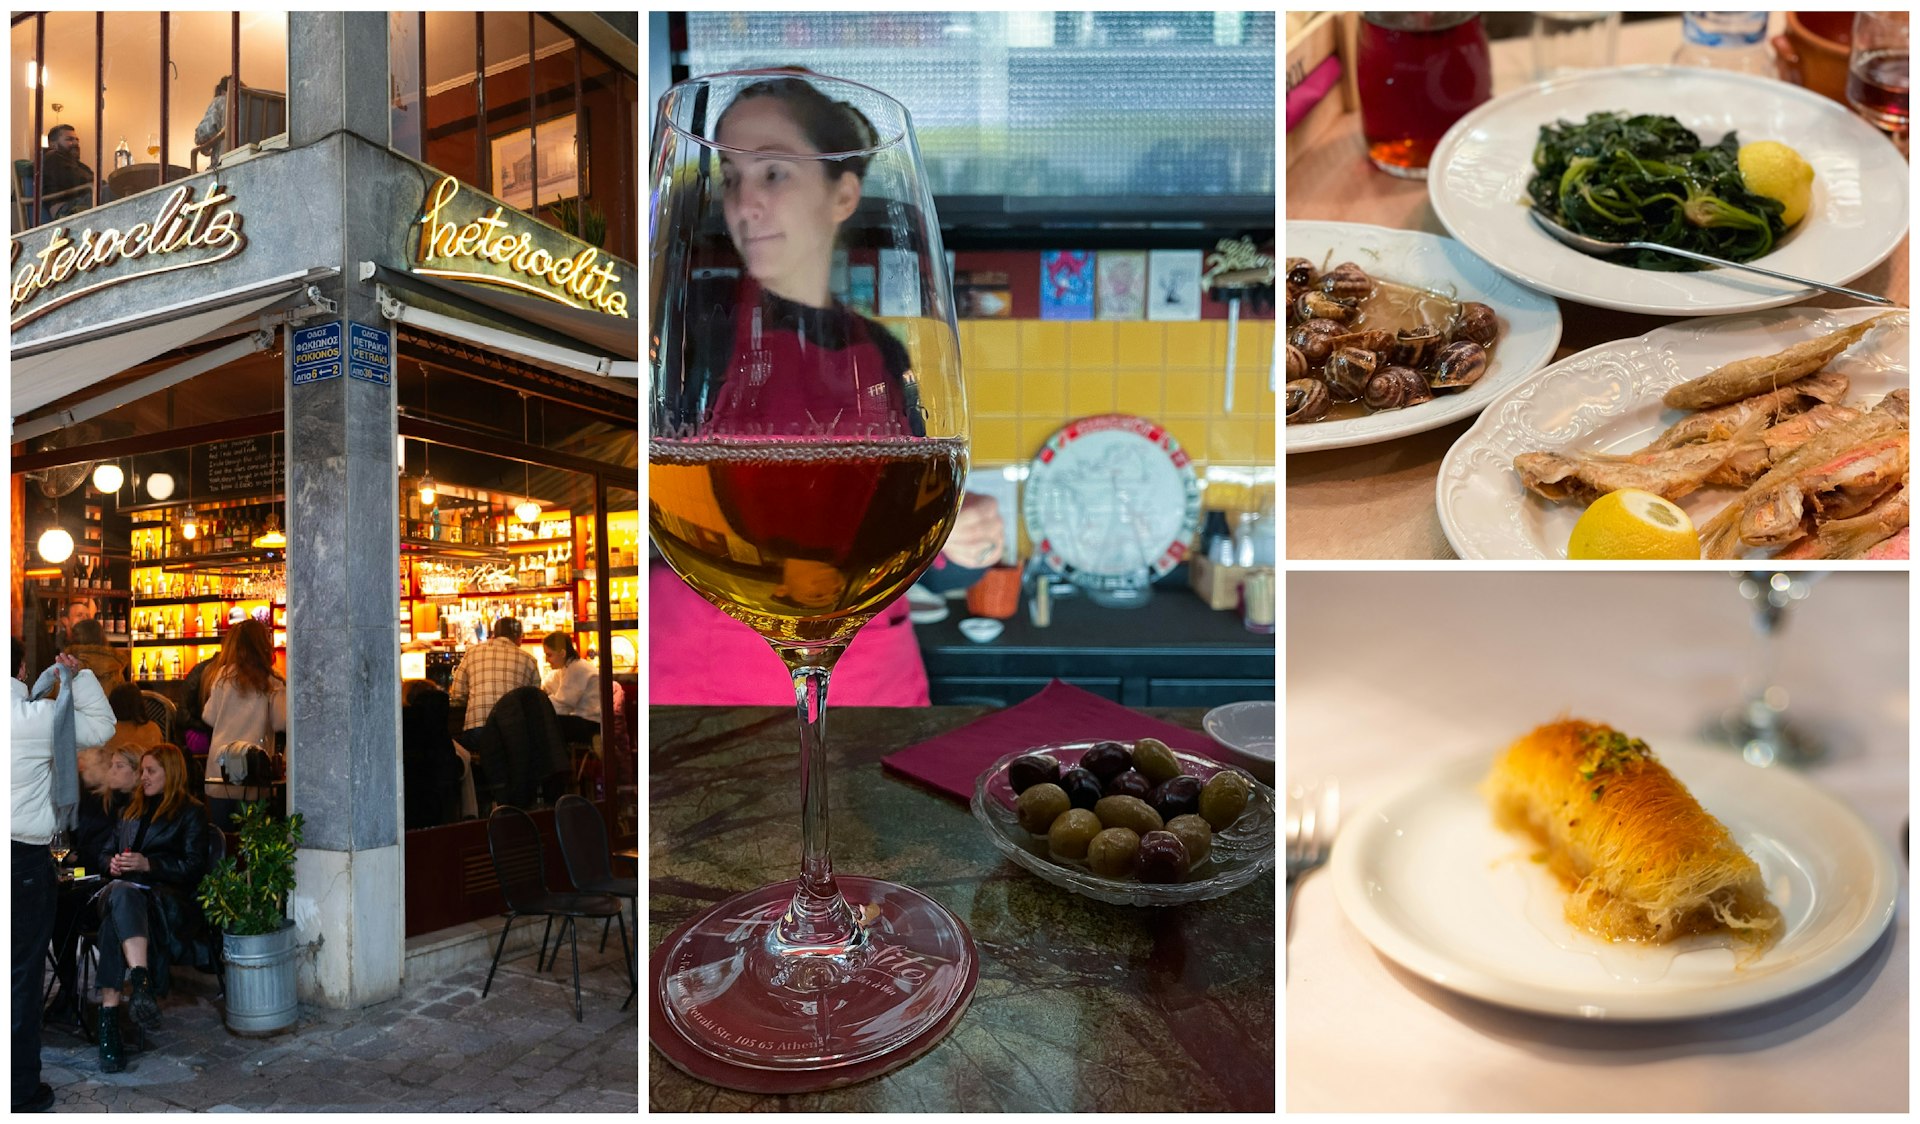 A collage of images from a night out in Athens including people gathering on a bar terrace, a glass of wine and olives, a dish of fried fish and a plate of filo pastry